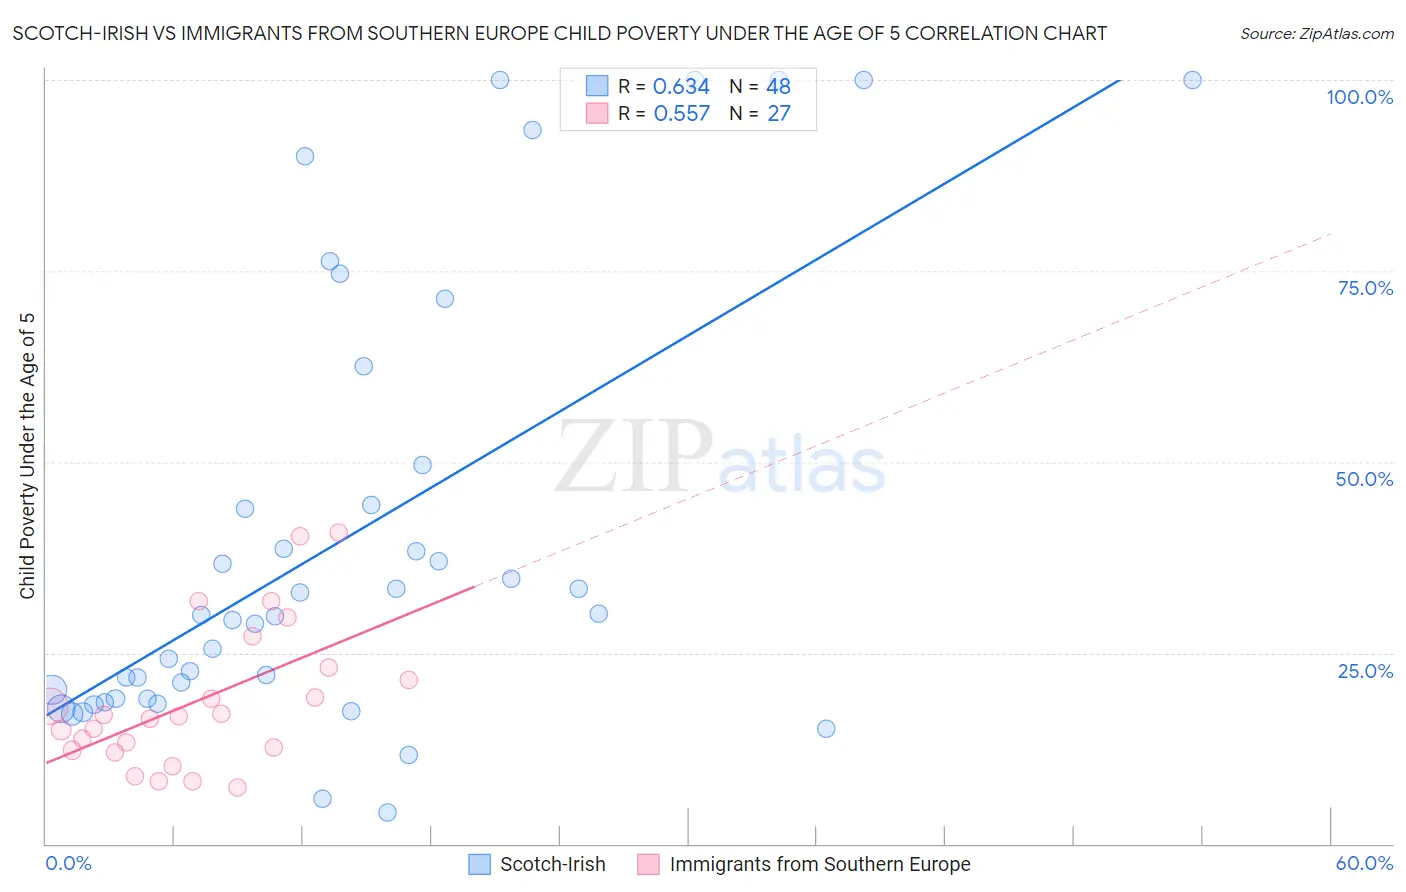 Scotch-Irish vs Immigrants from Southern Europe Child Poverty Under the Age of 5